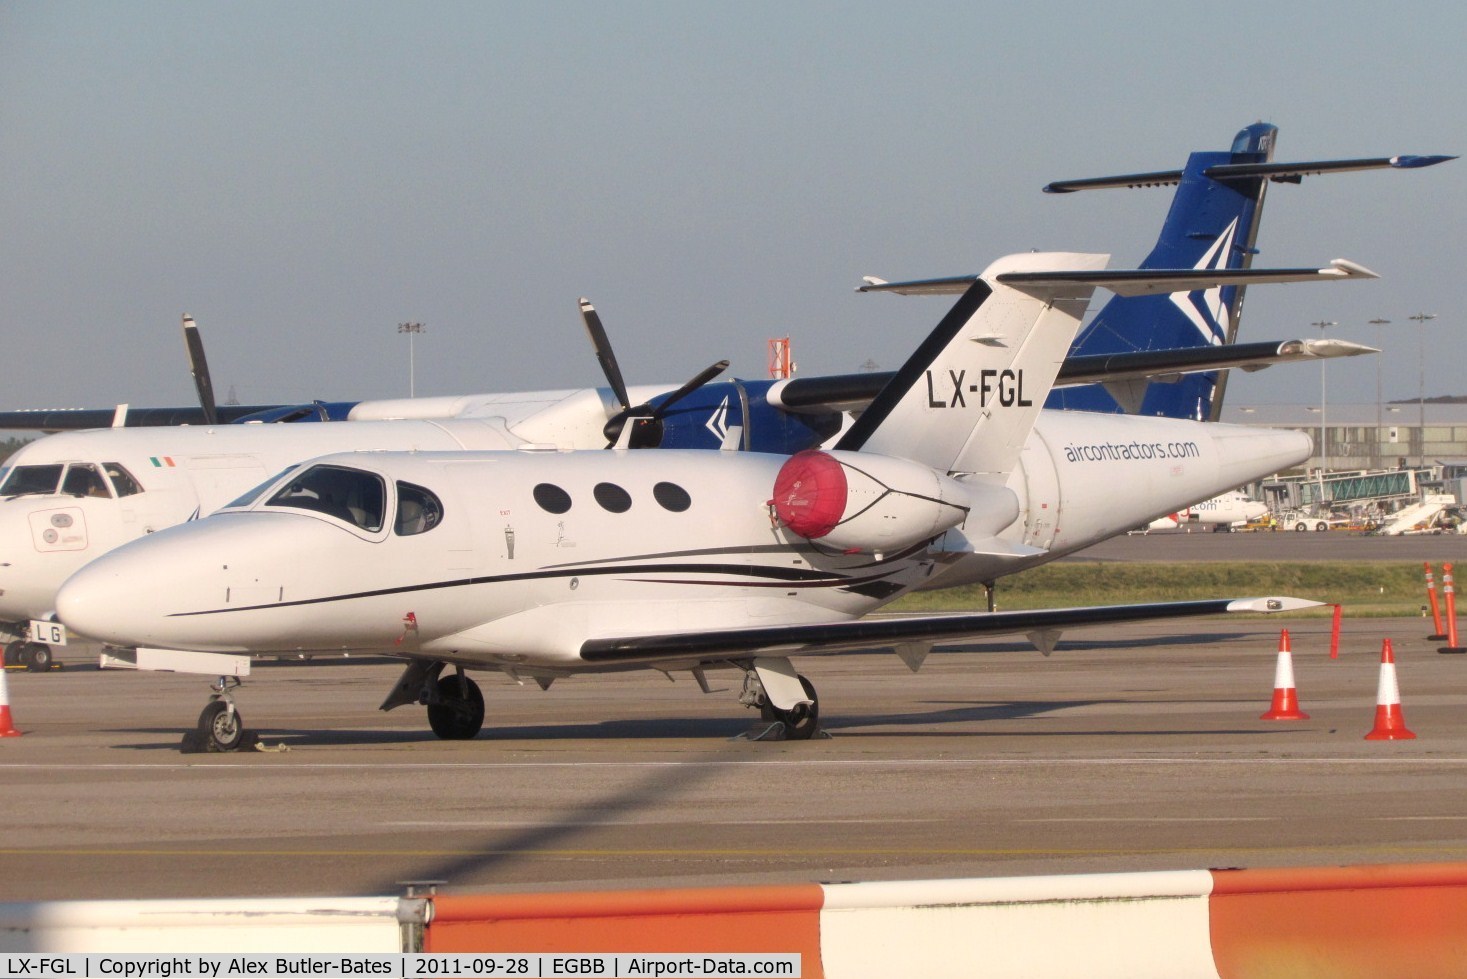 LX-FGL, 2008 Cessna 510 Citation Mustang Citation Mustang C/N 510-0132, Parked on the elmdon apron